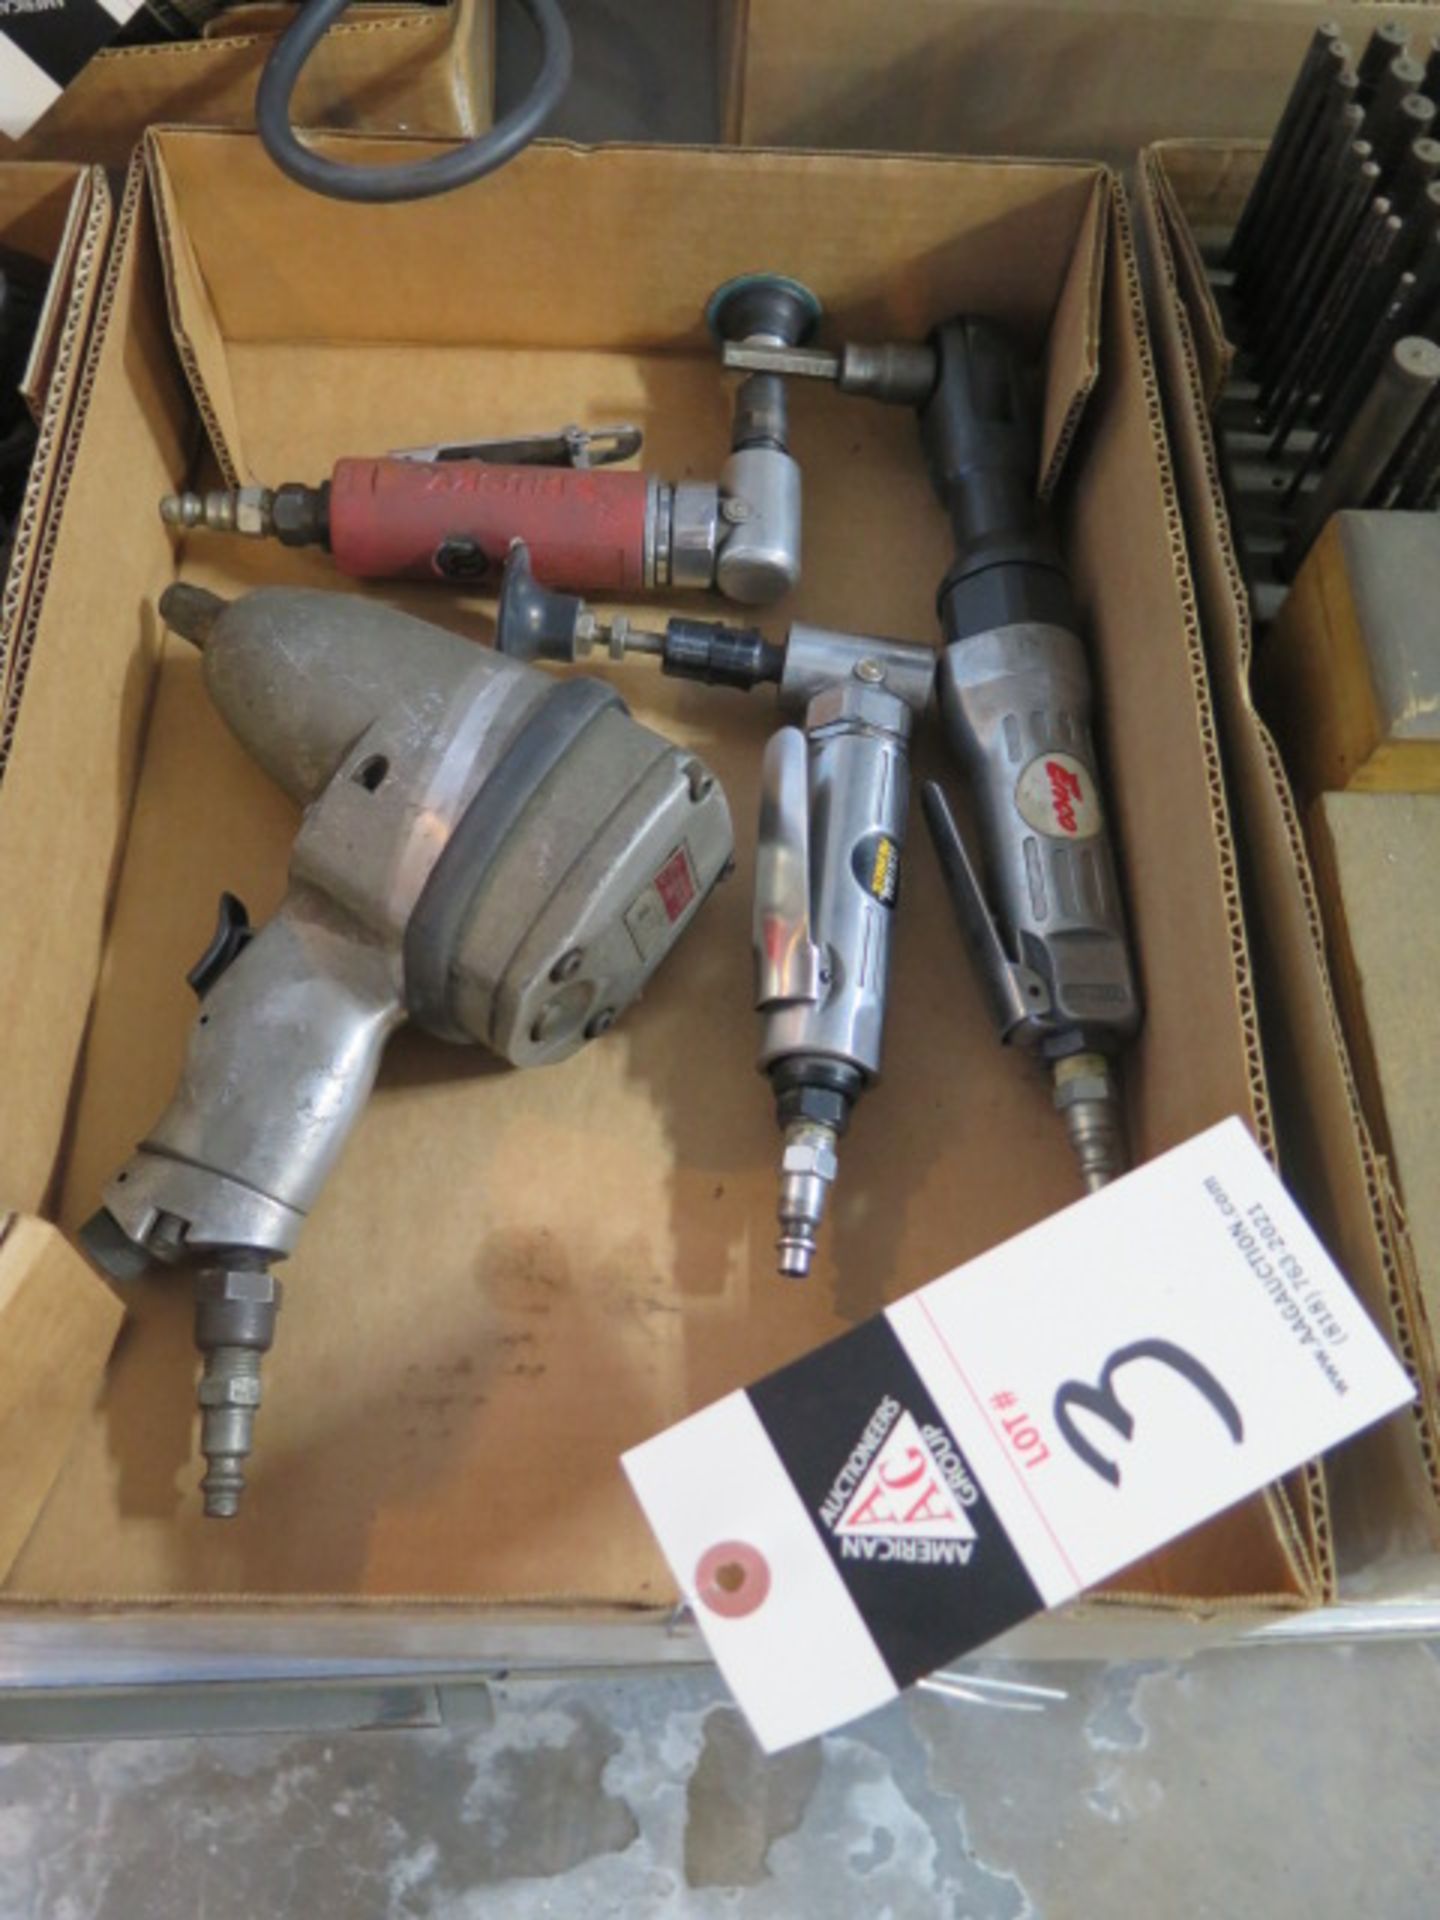 Pneumatic Grinders, Impact and Socket Wrench